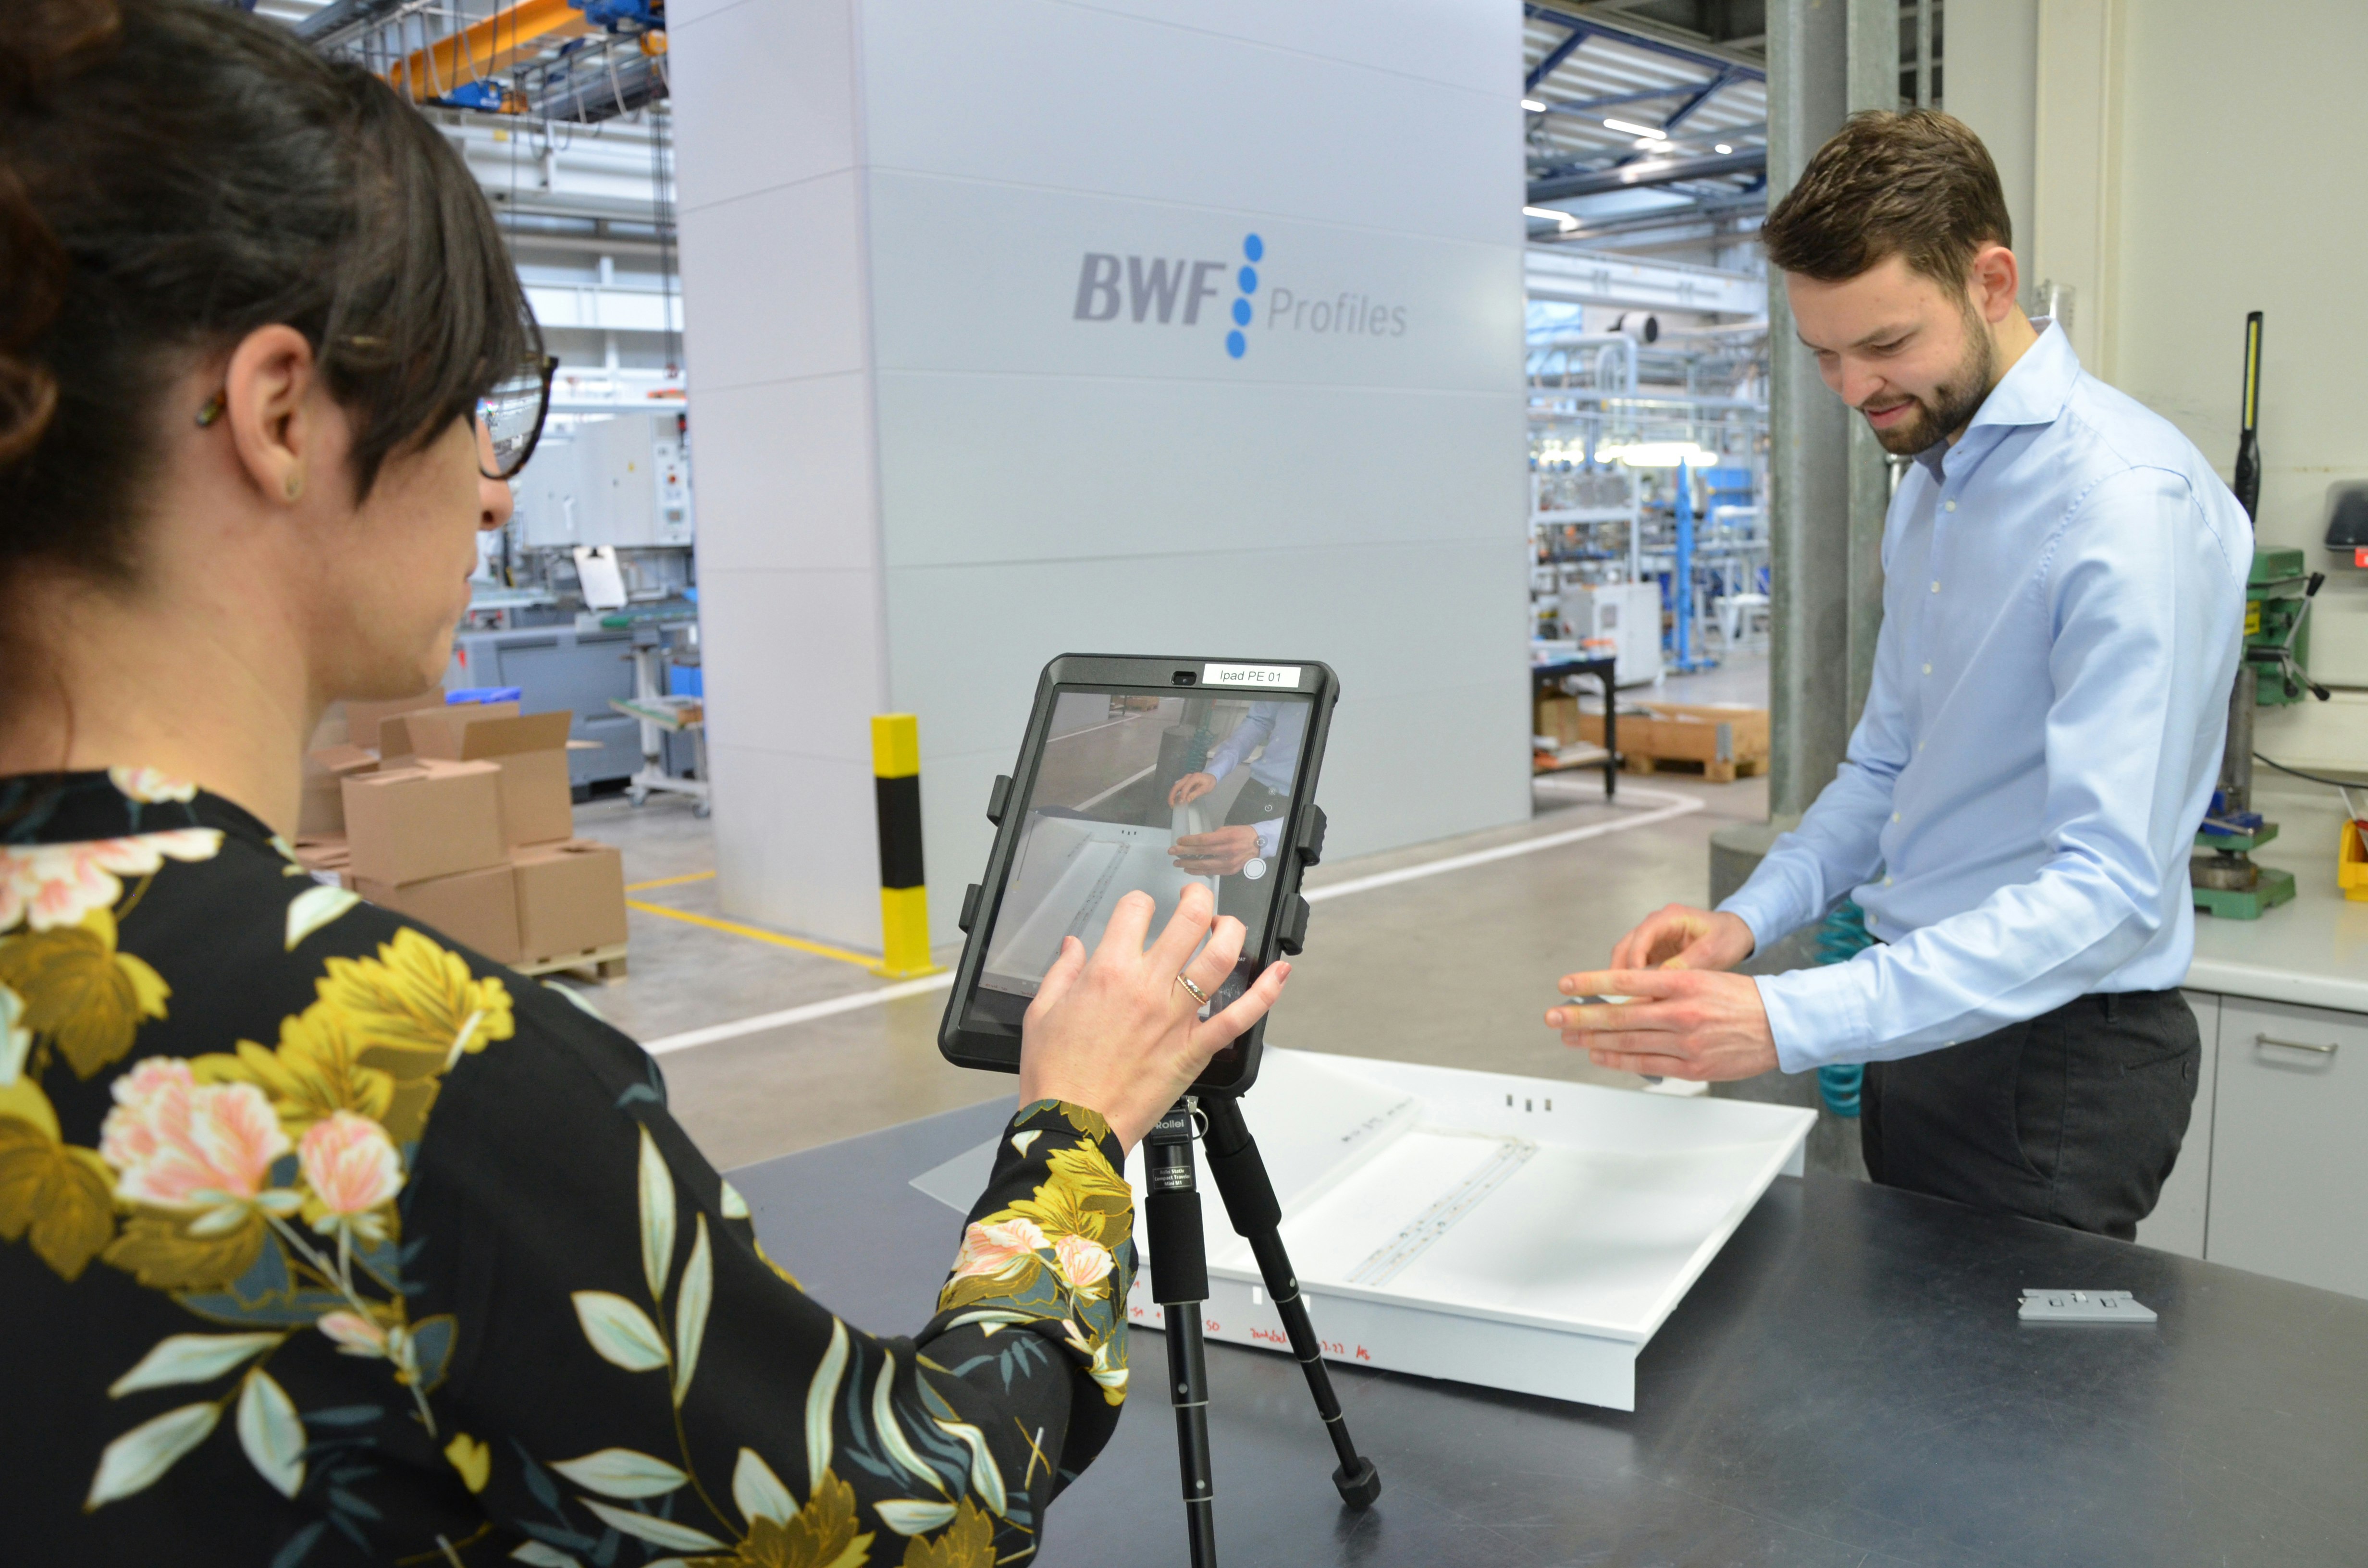 Operations1 in use on the shop floor at BWF Profiles